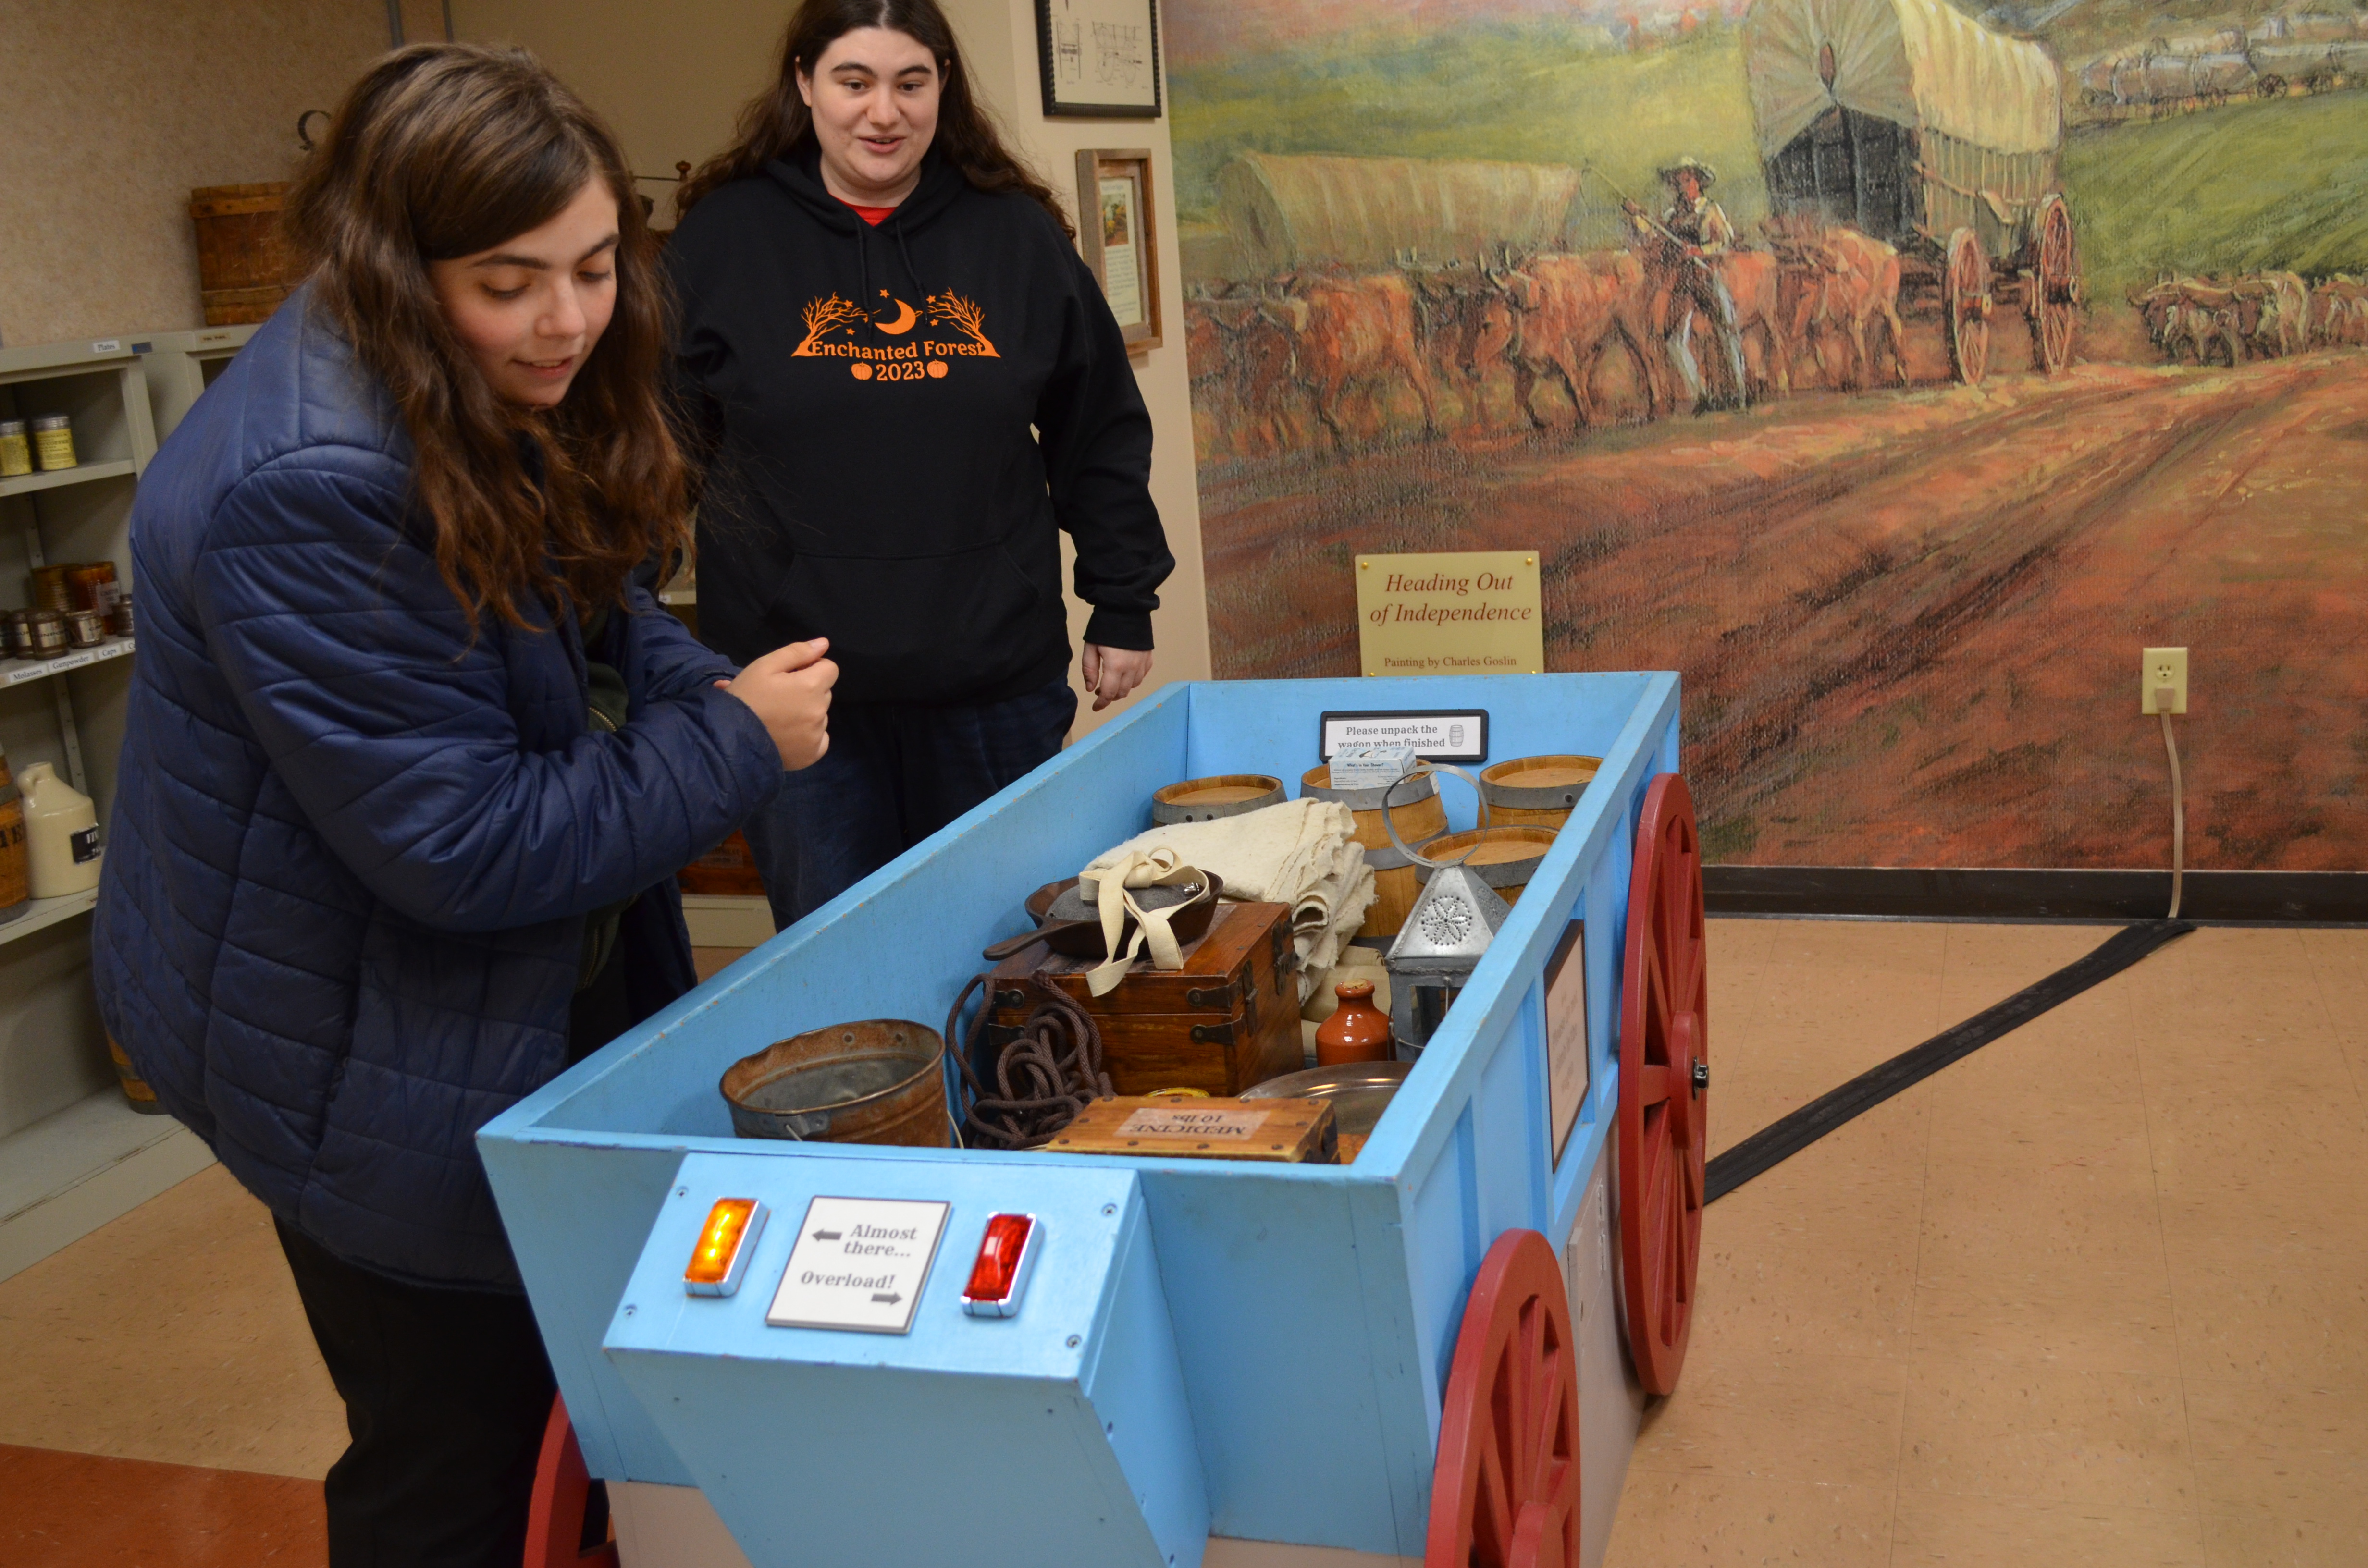 Two young women load items into a blue box representing a wagon at the National Frontier Trails Museum.